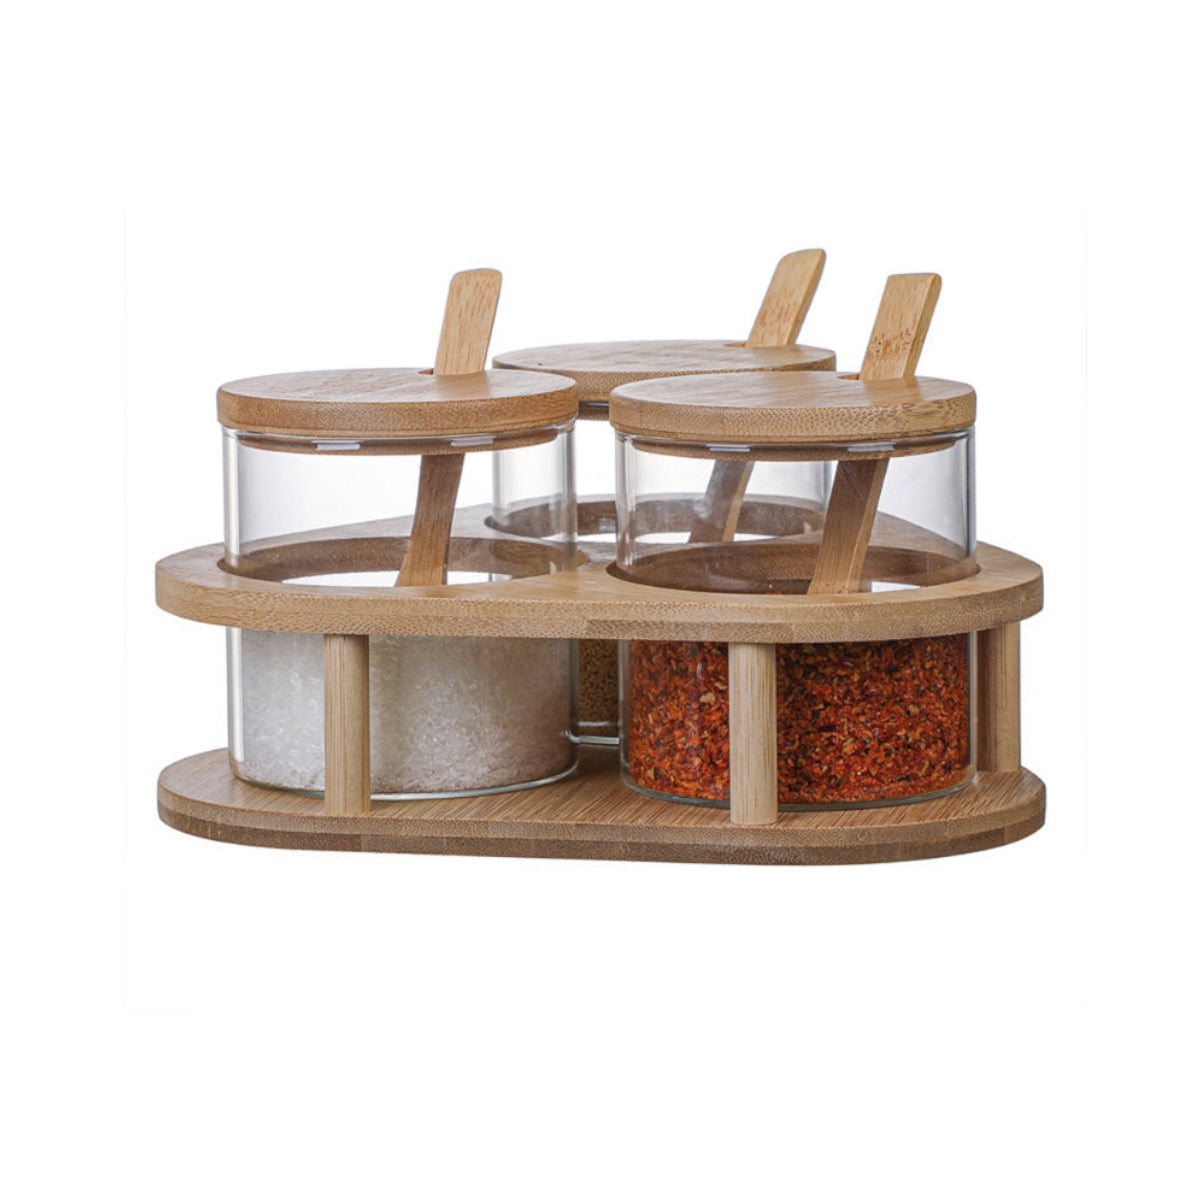 Glass Spice Cellar Set With Bamboo Spoons